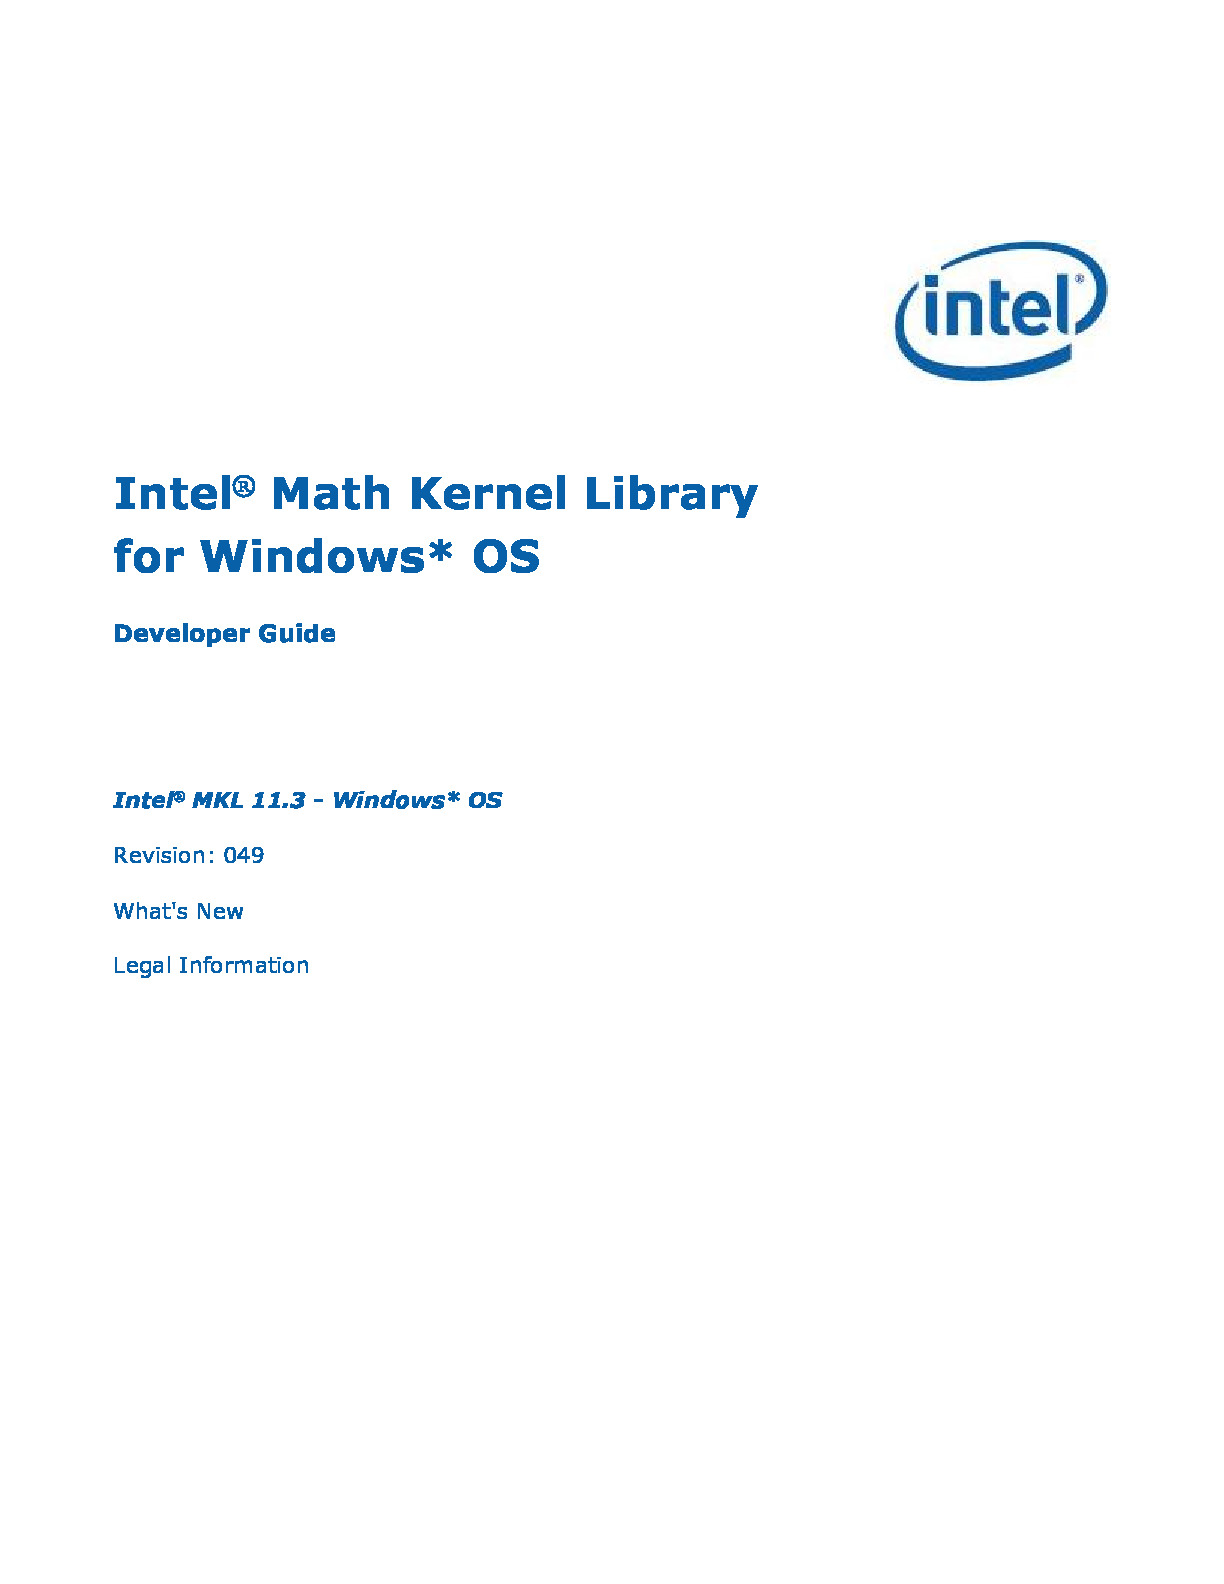 Intel Math Kernel Library for Windows OS